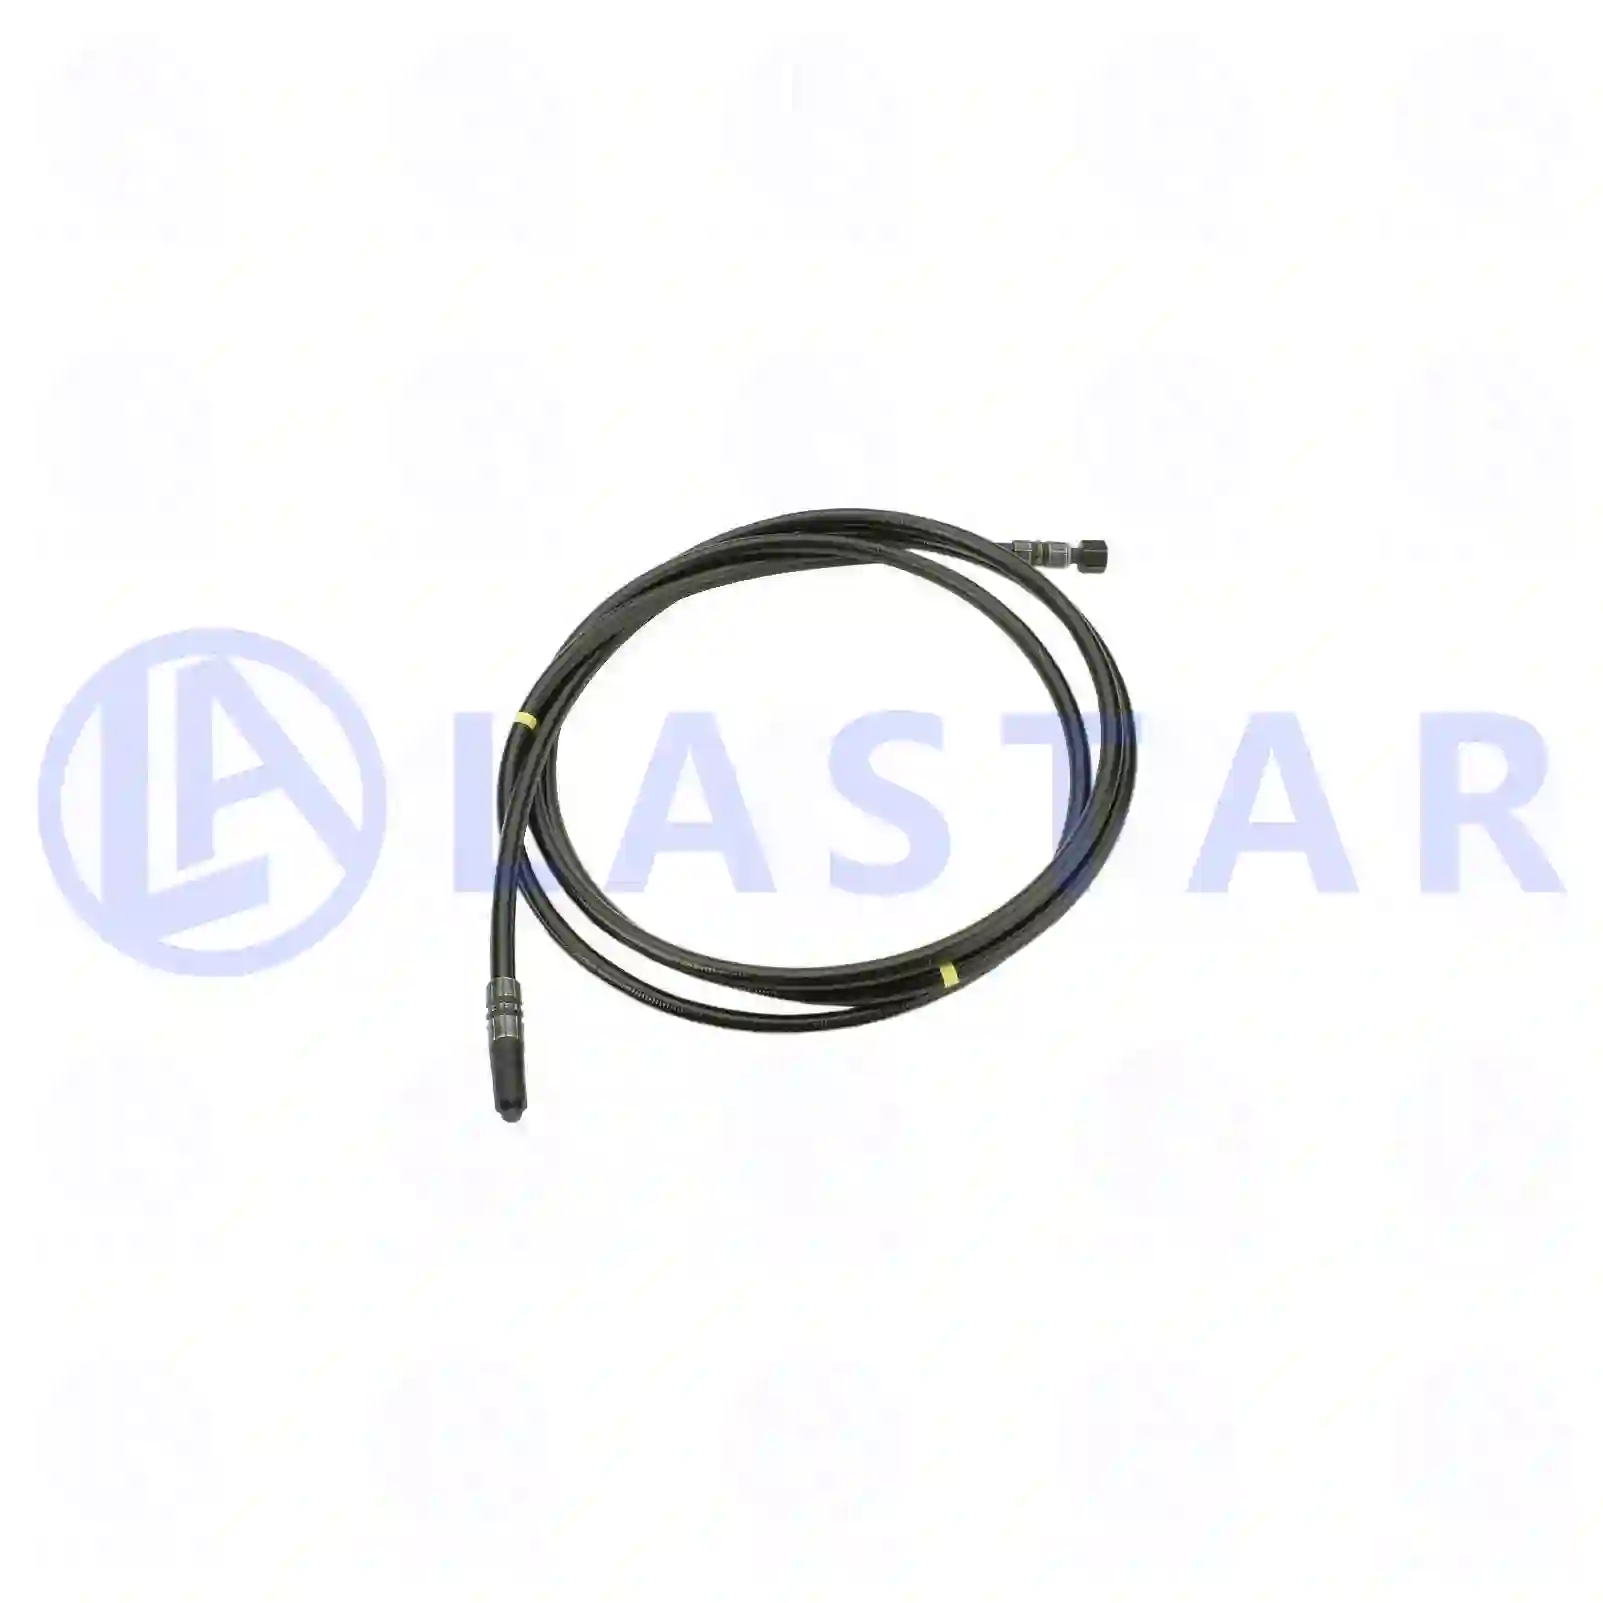 Hydraulic hose, 77722230, 20443292, 2046664 ||  77722230 Lastar Spare Part | Truck Spare Parts, Auotomotive Spare Parts Hydraulic hose, 77722230, 20443292, 2046664 ||  77722230 Lastar Spare Part | Truck Spare Parts, Auotomotive Spare Parts